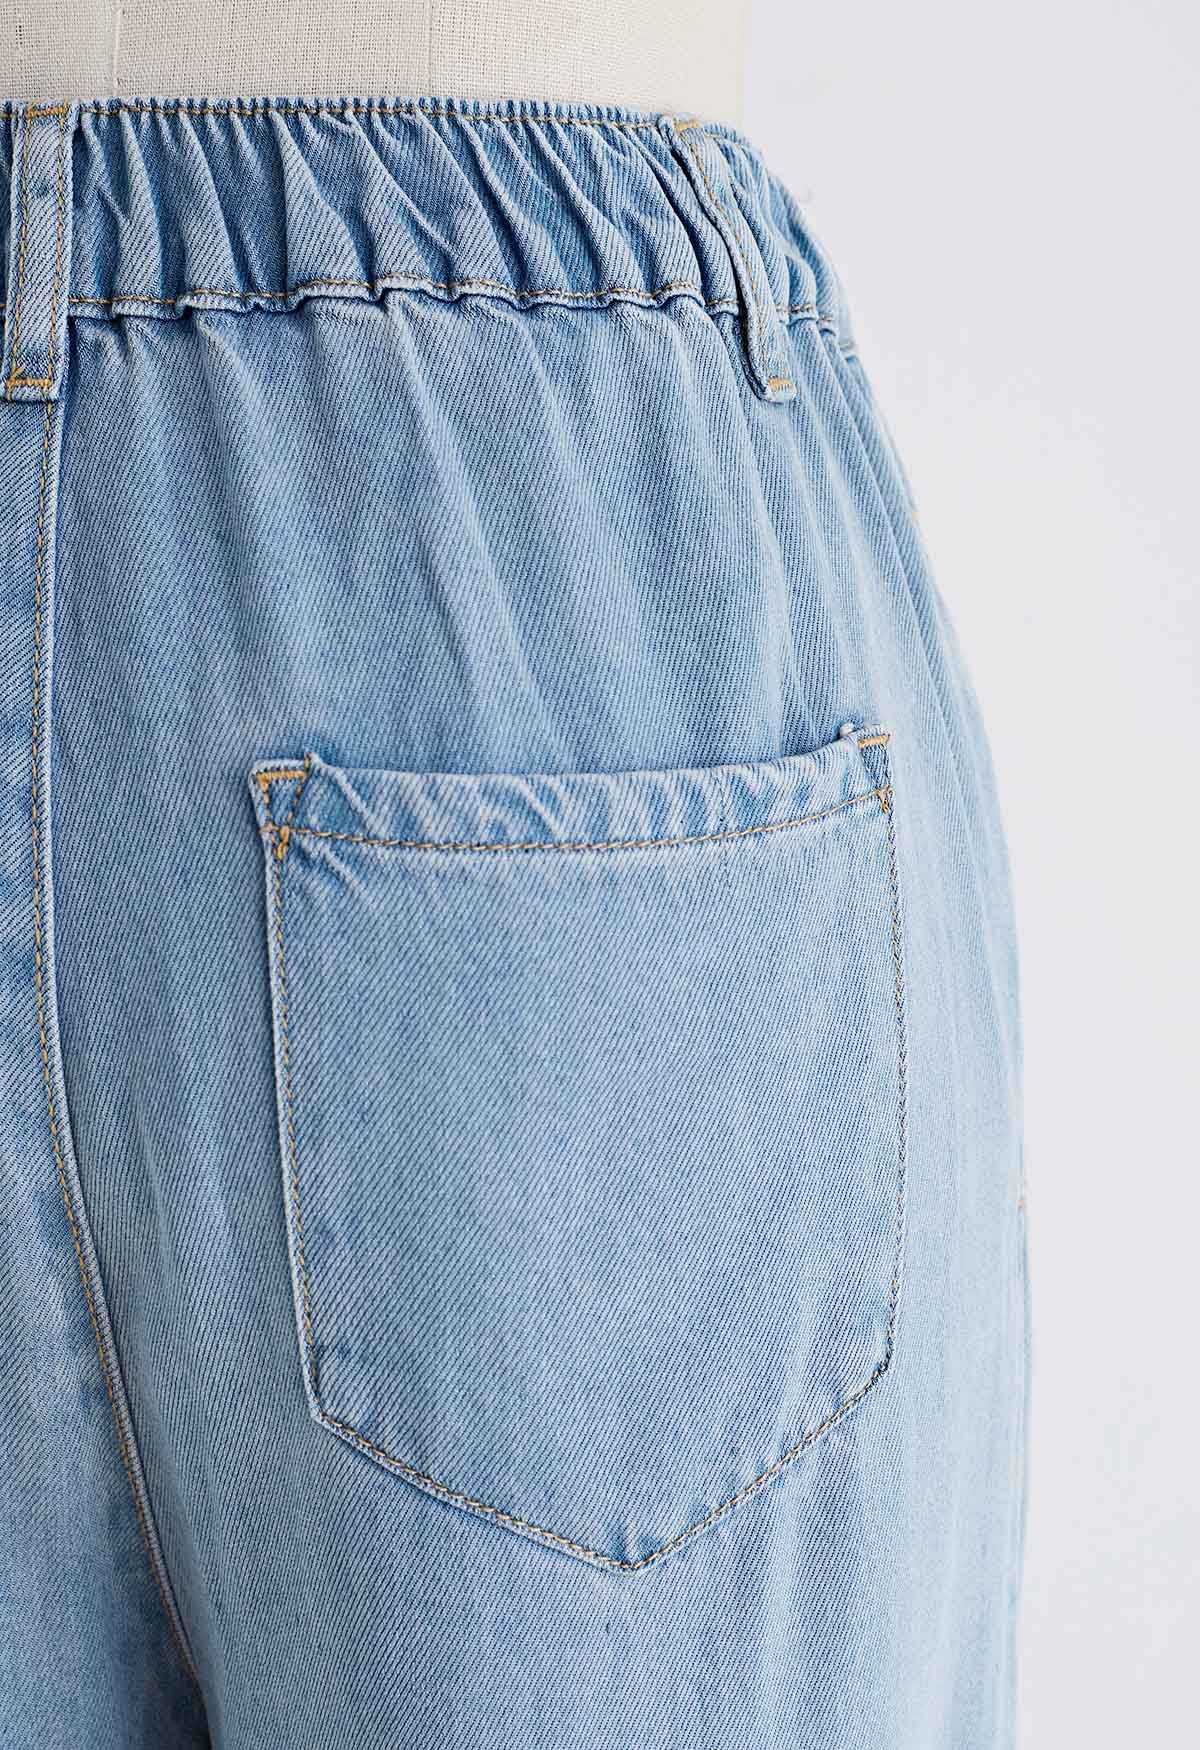 Light Wash Blue Pleated Jeans - Retro, Indie and Unique Fashion